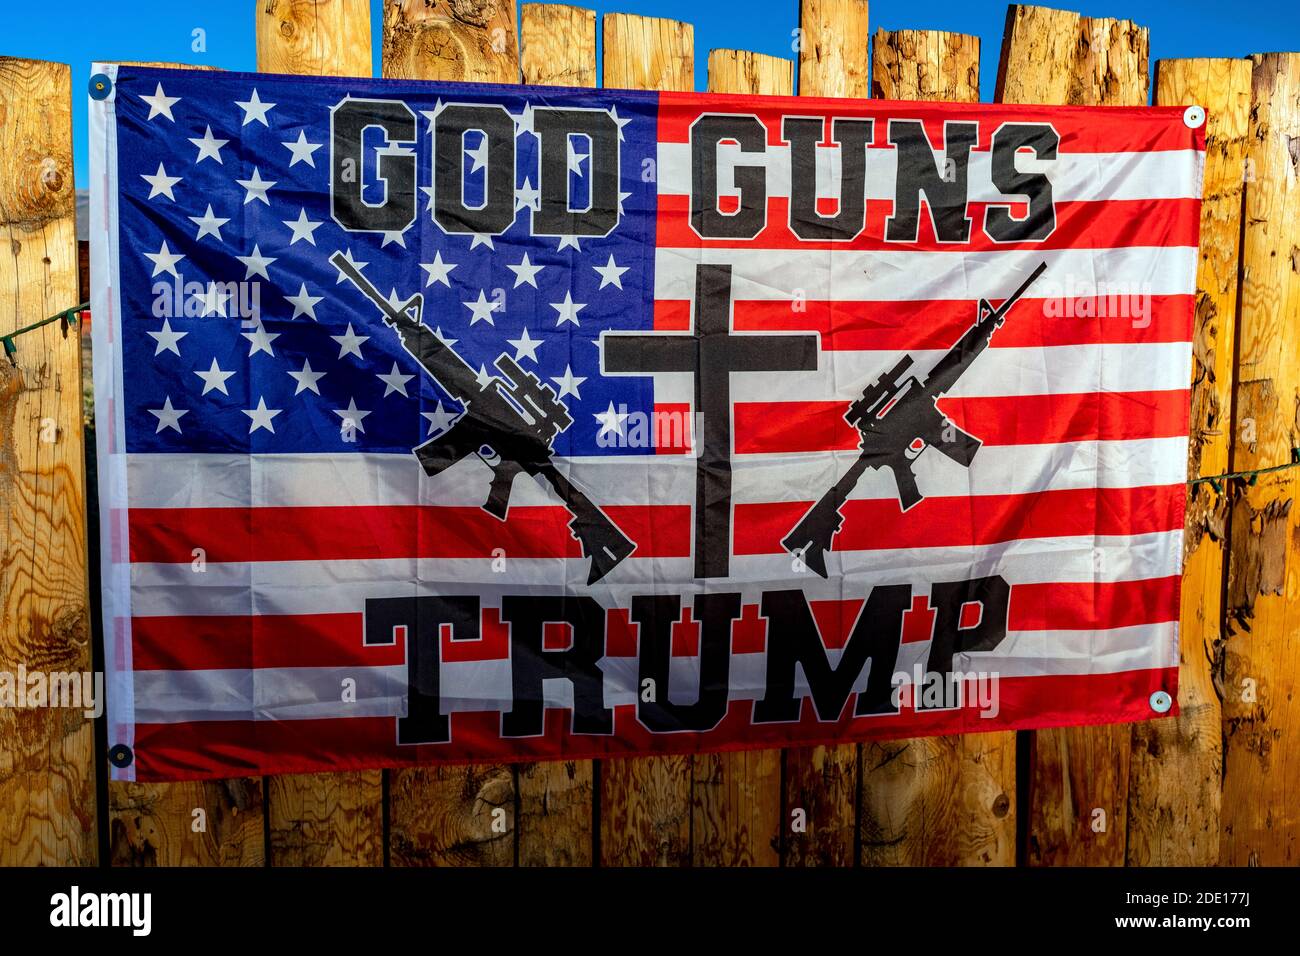 'God Guns Trump': Trump supporters flag in New Mexico Stock Photo